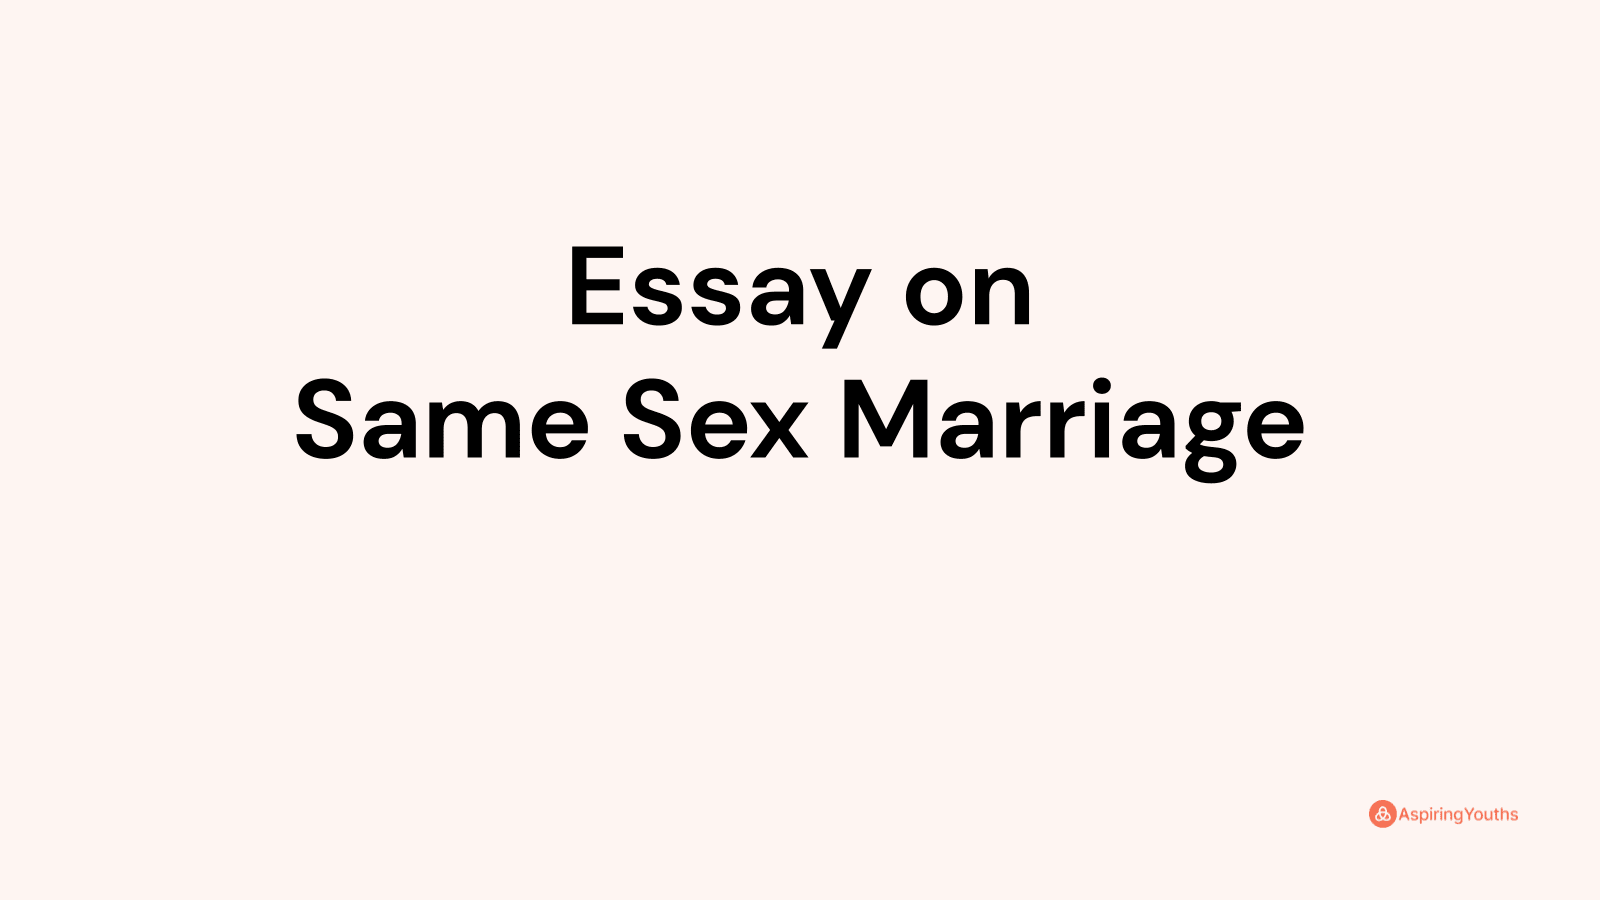 same sex marriage introduction body and conclusion essay